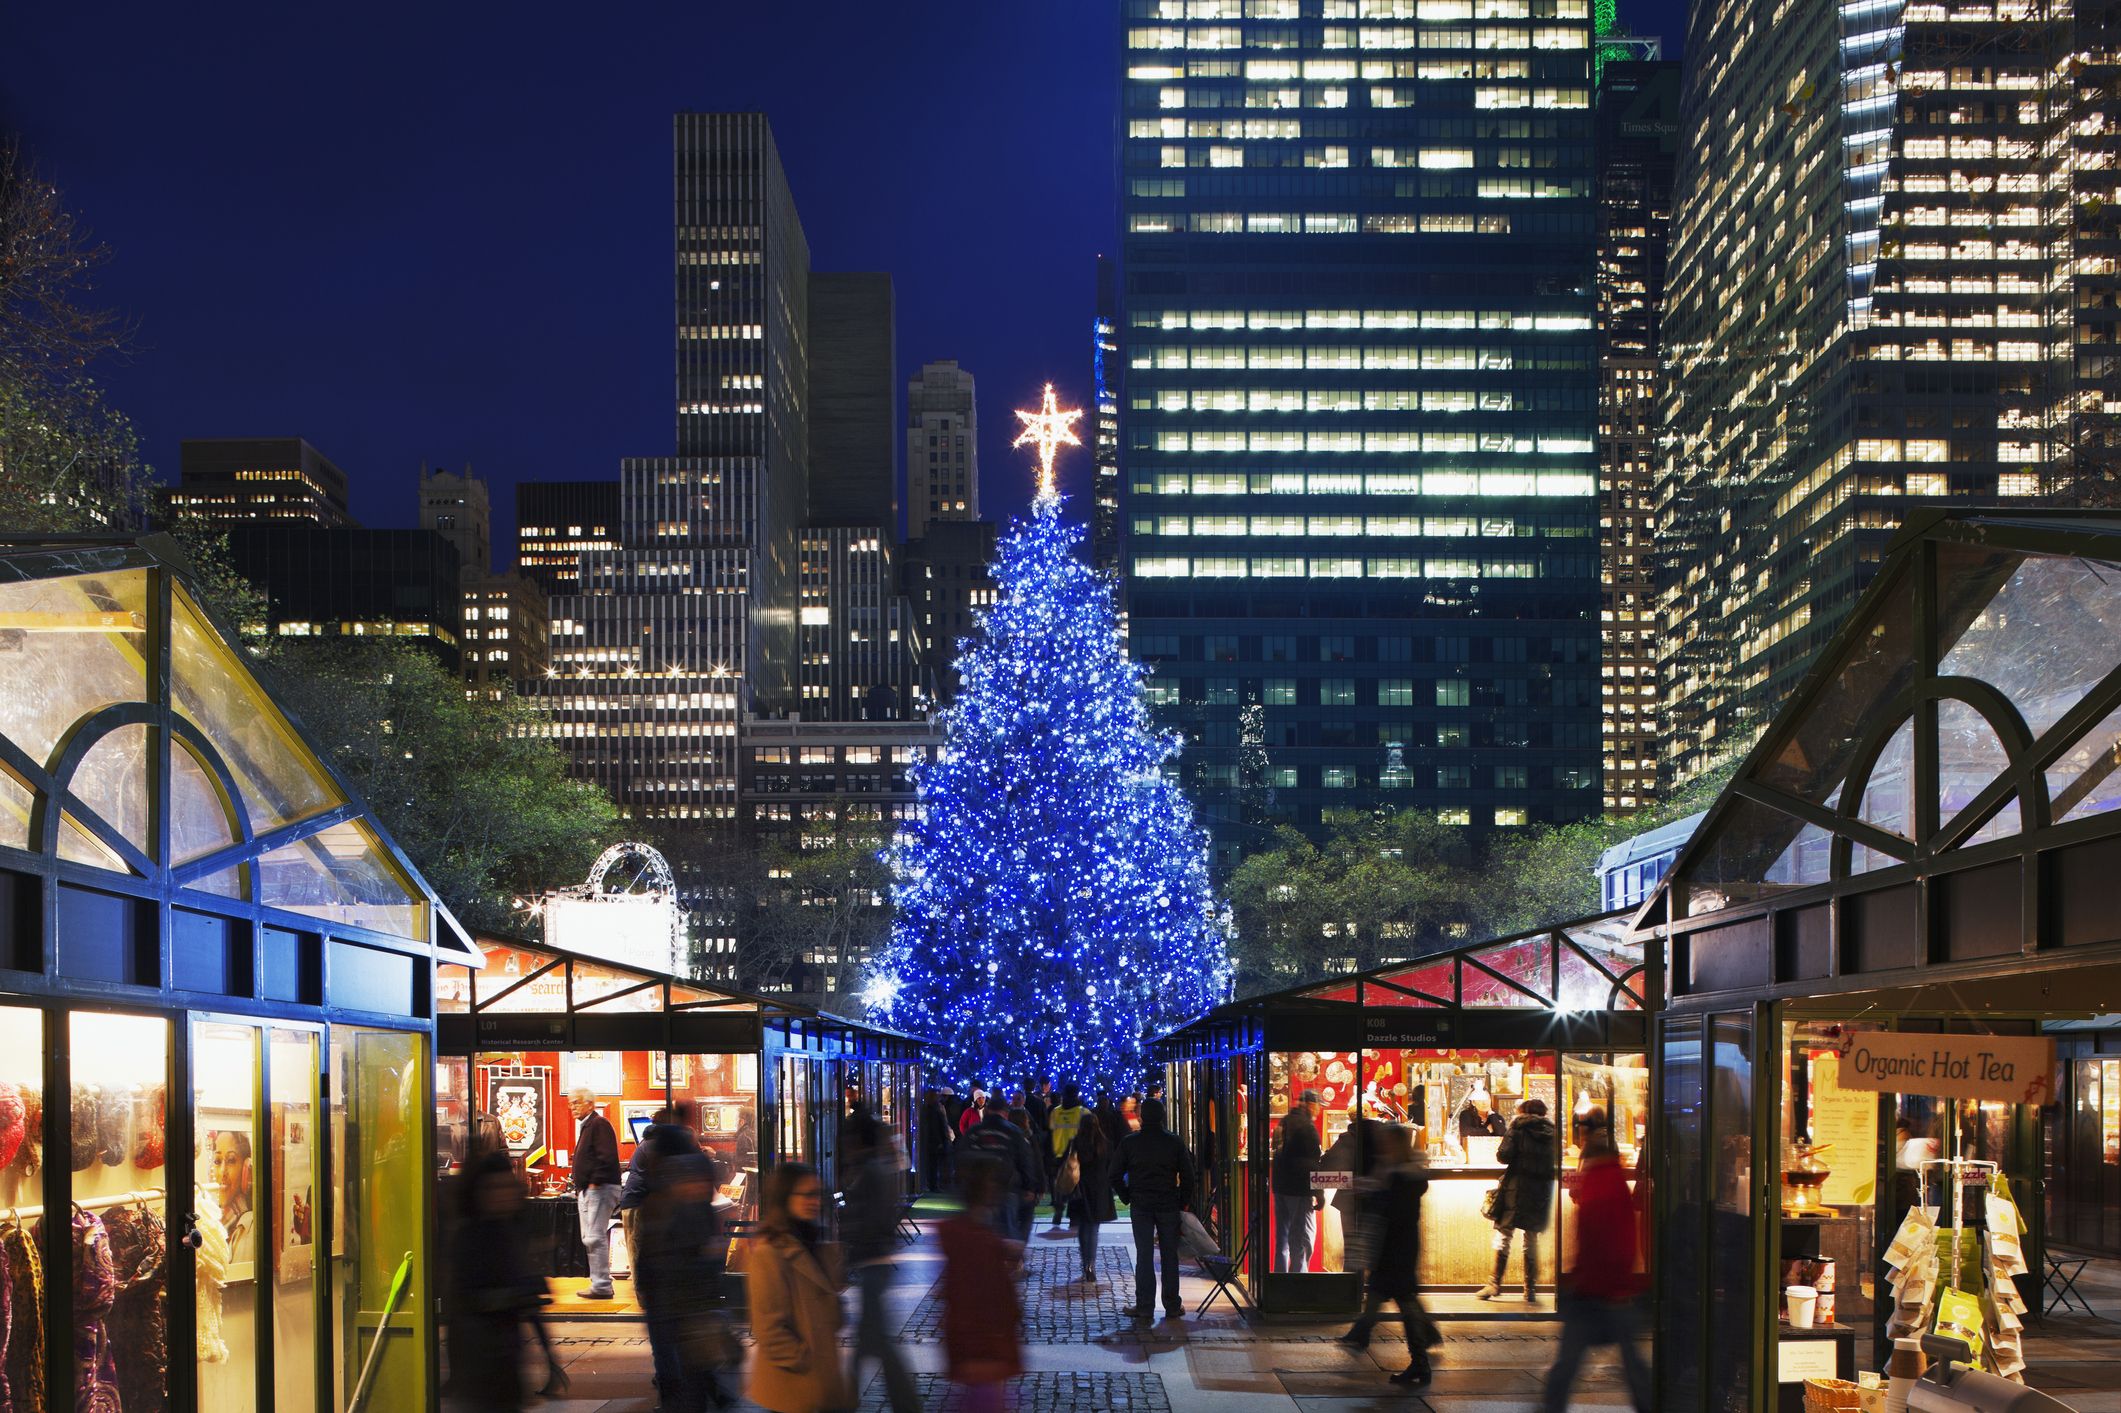 https://hips.hearstapps.com/hmg-prod/images/the-holiday-market-in-bryant-park-royalty-free-image-1693347524.jpg